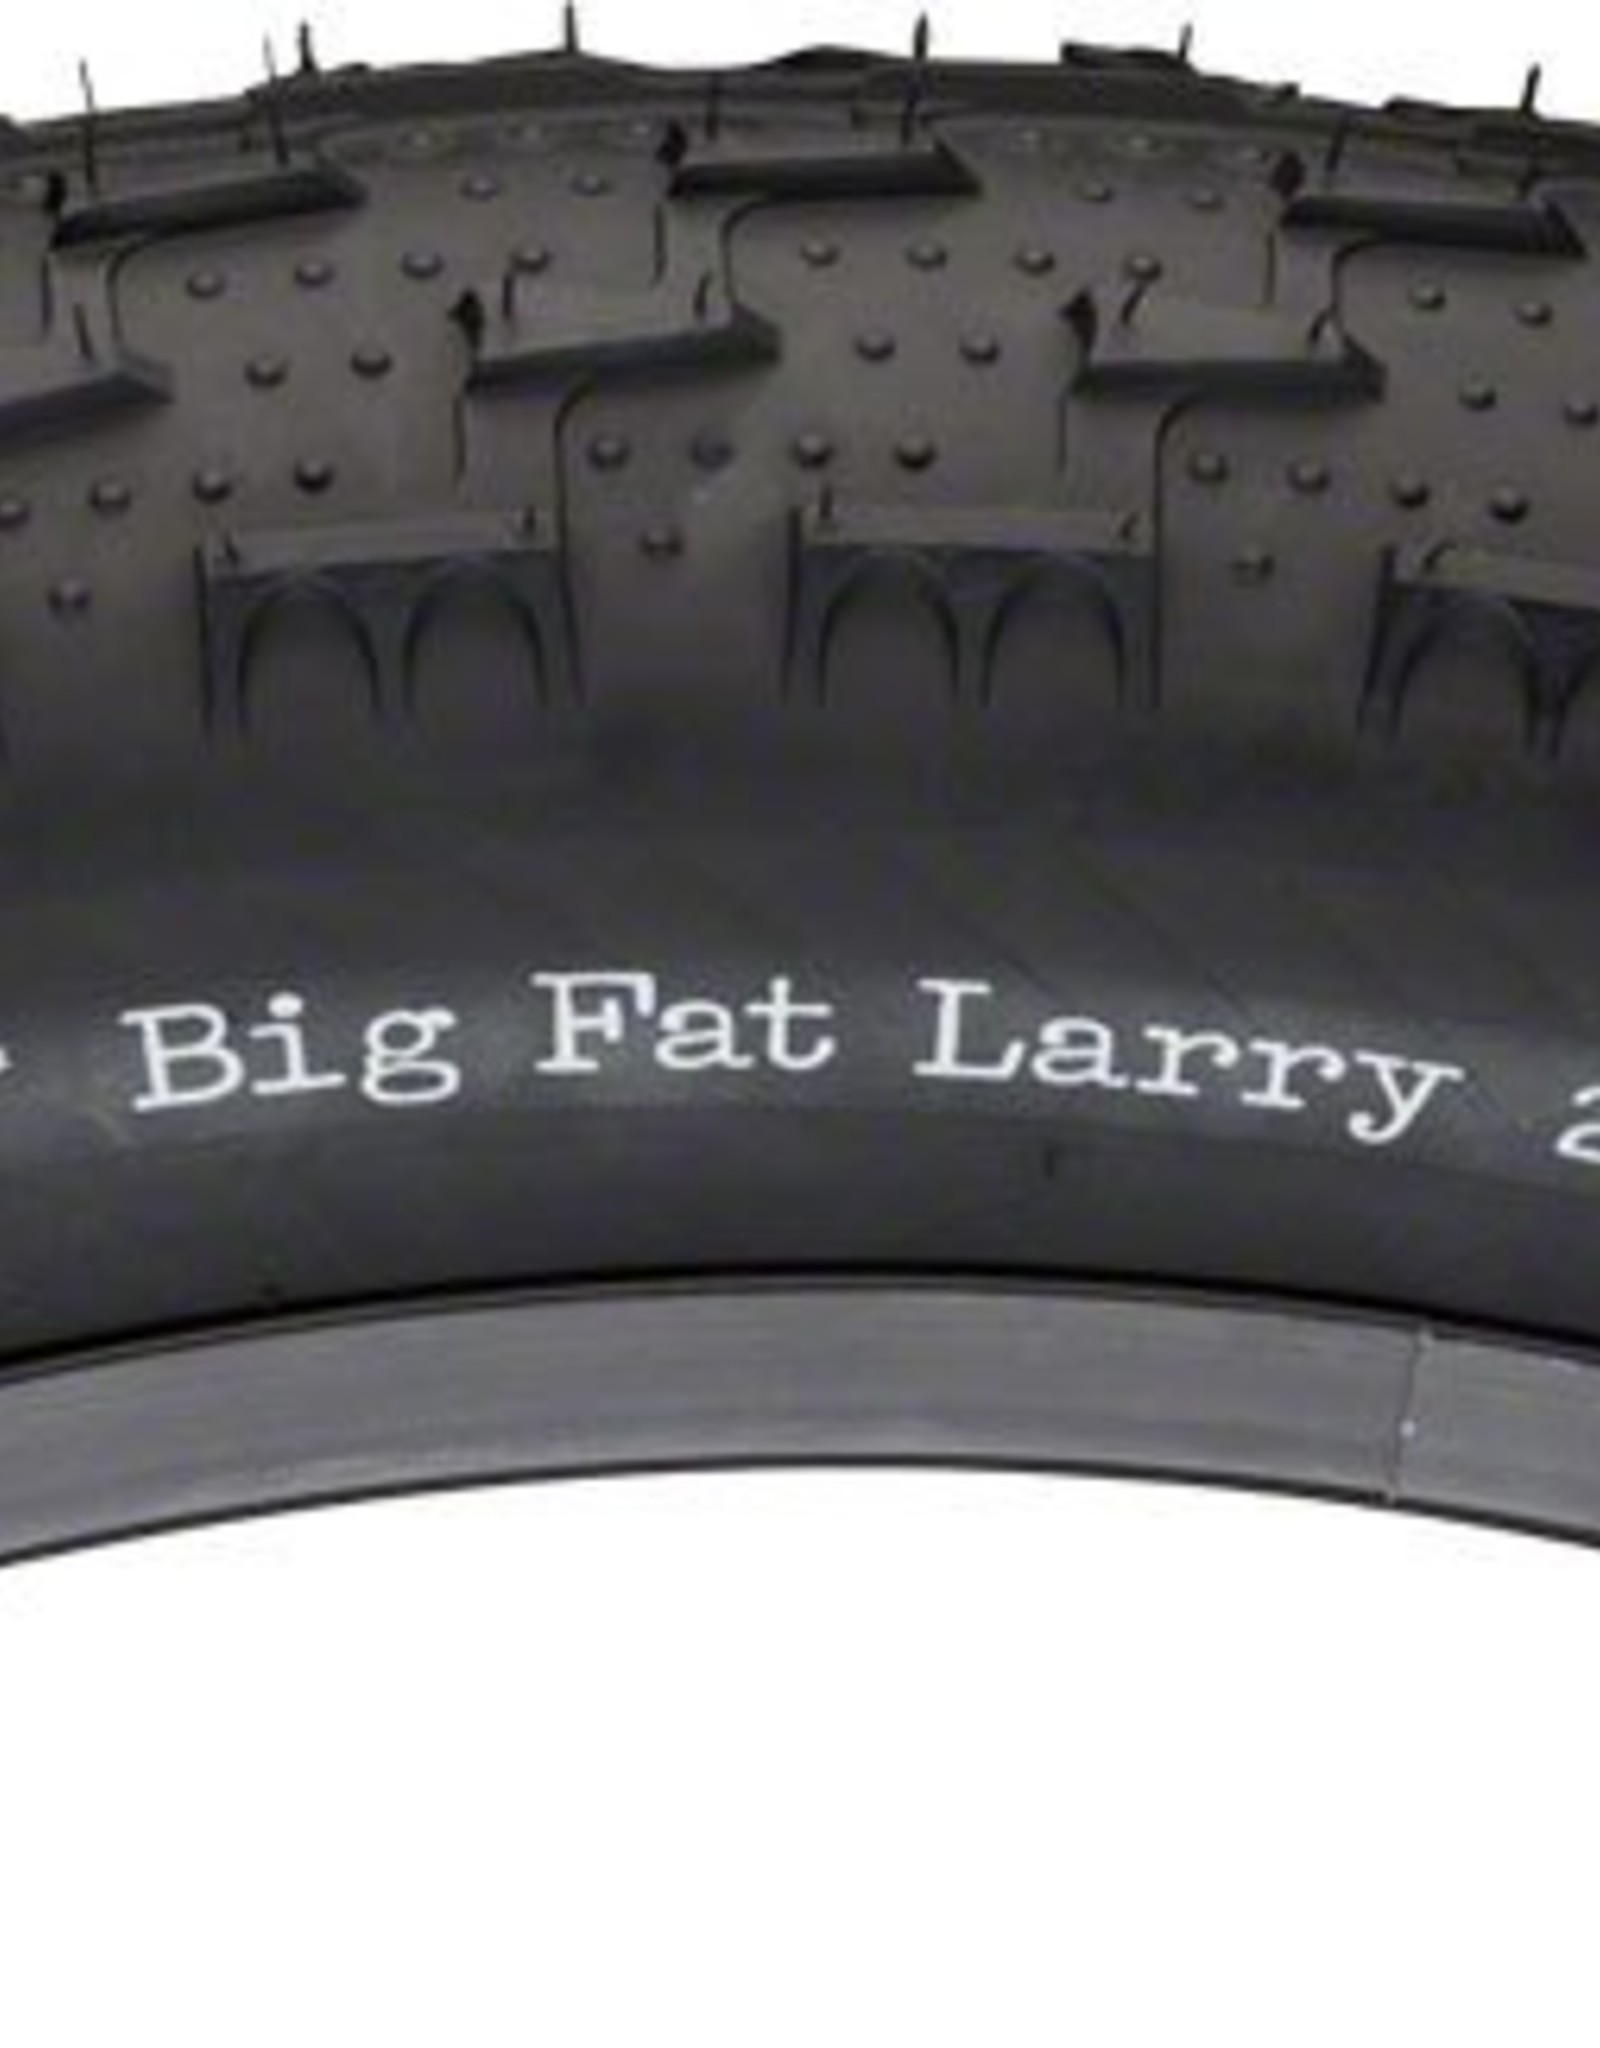 surly larry fat tires